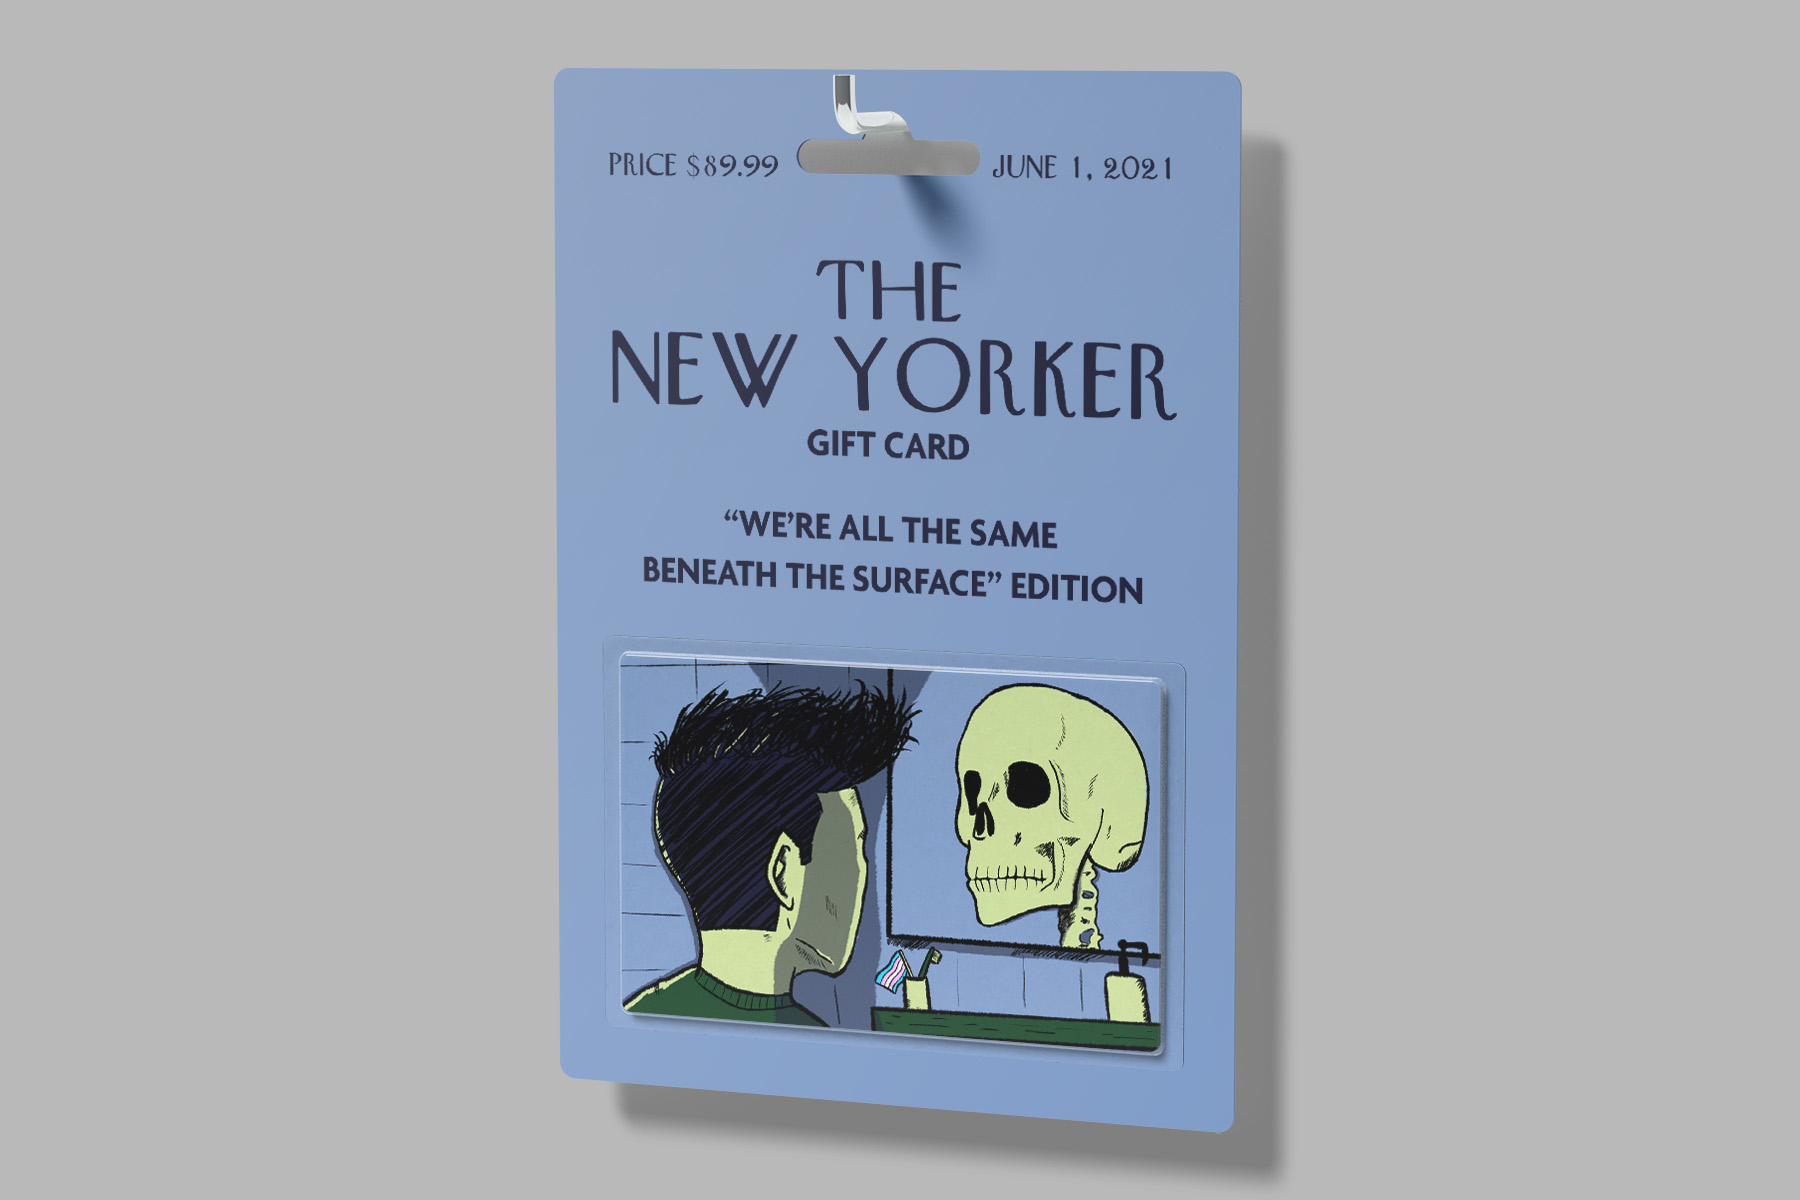 Gift Card for The New Yorker